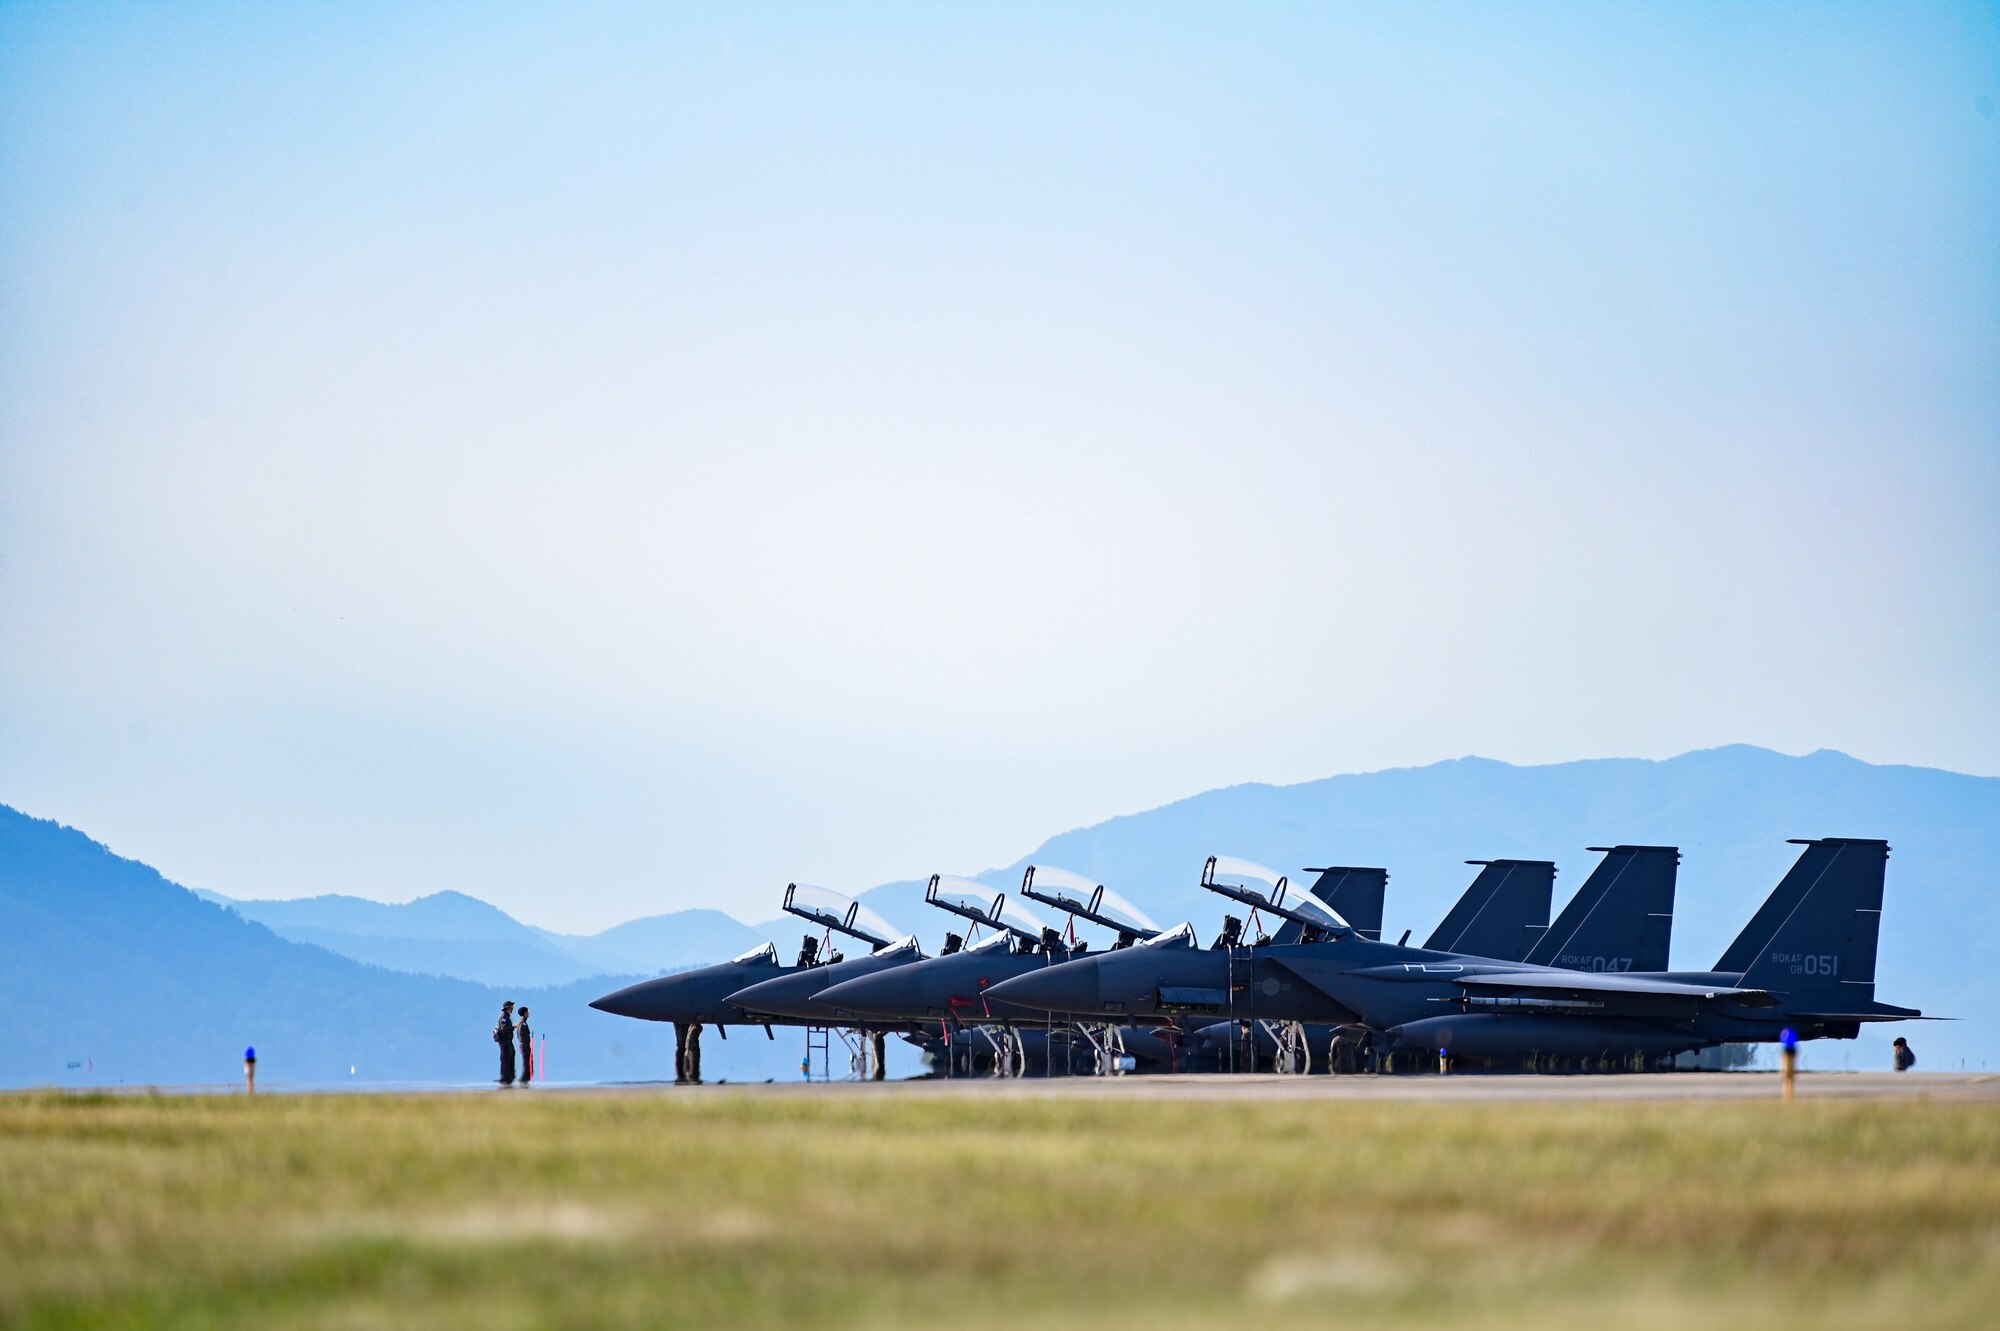 Republic of Korea Air Force F-15K Slam Eagles assigned to the 110th Fighter Squadron sit on the runway during a routine training at Kunsan Air Base, Republic of Korea, Sept. 22, 2022. The training provides participants the opportunity to introduce and review tactics, as well as exchange mission planning ideas. (U.S. Air Force Photo by Senior Airman Shannon Braaten)